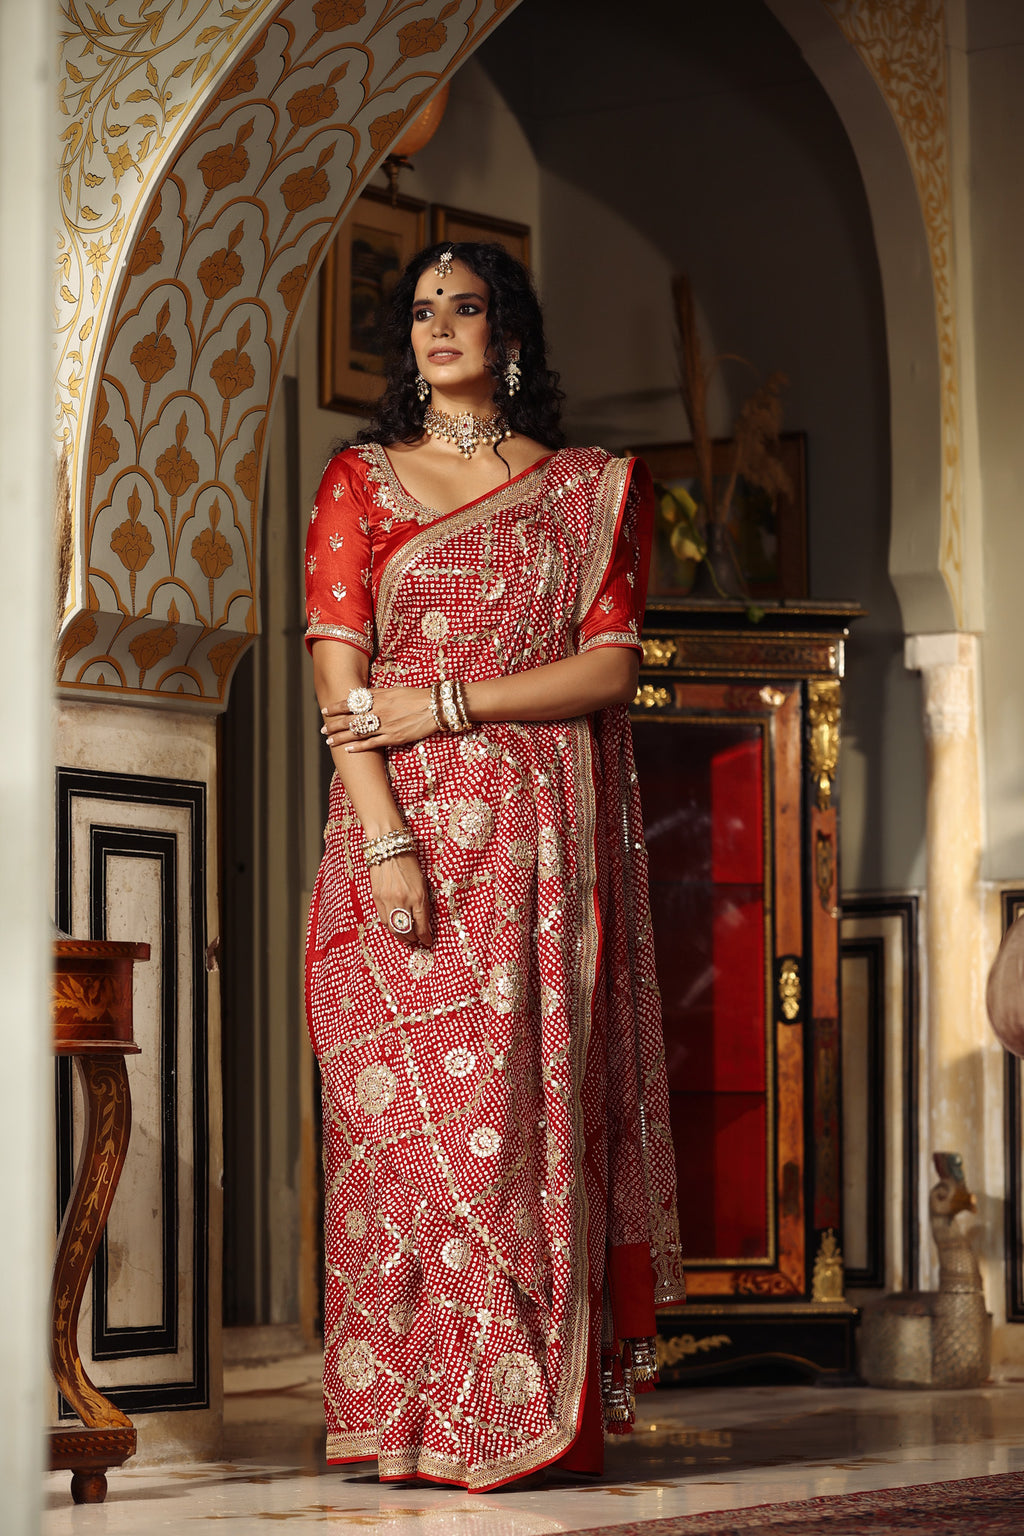 Maanvi Gagroo's Traditional Red Bridal Saree Is Truly Modern In Essence